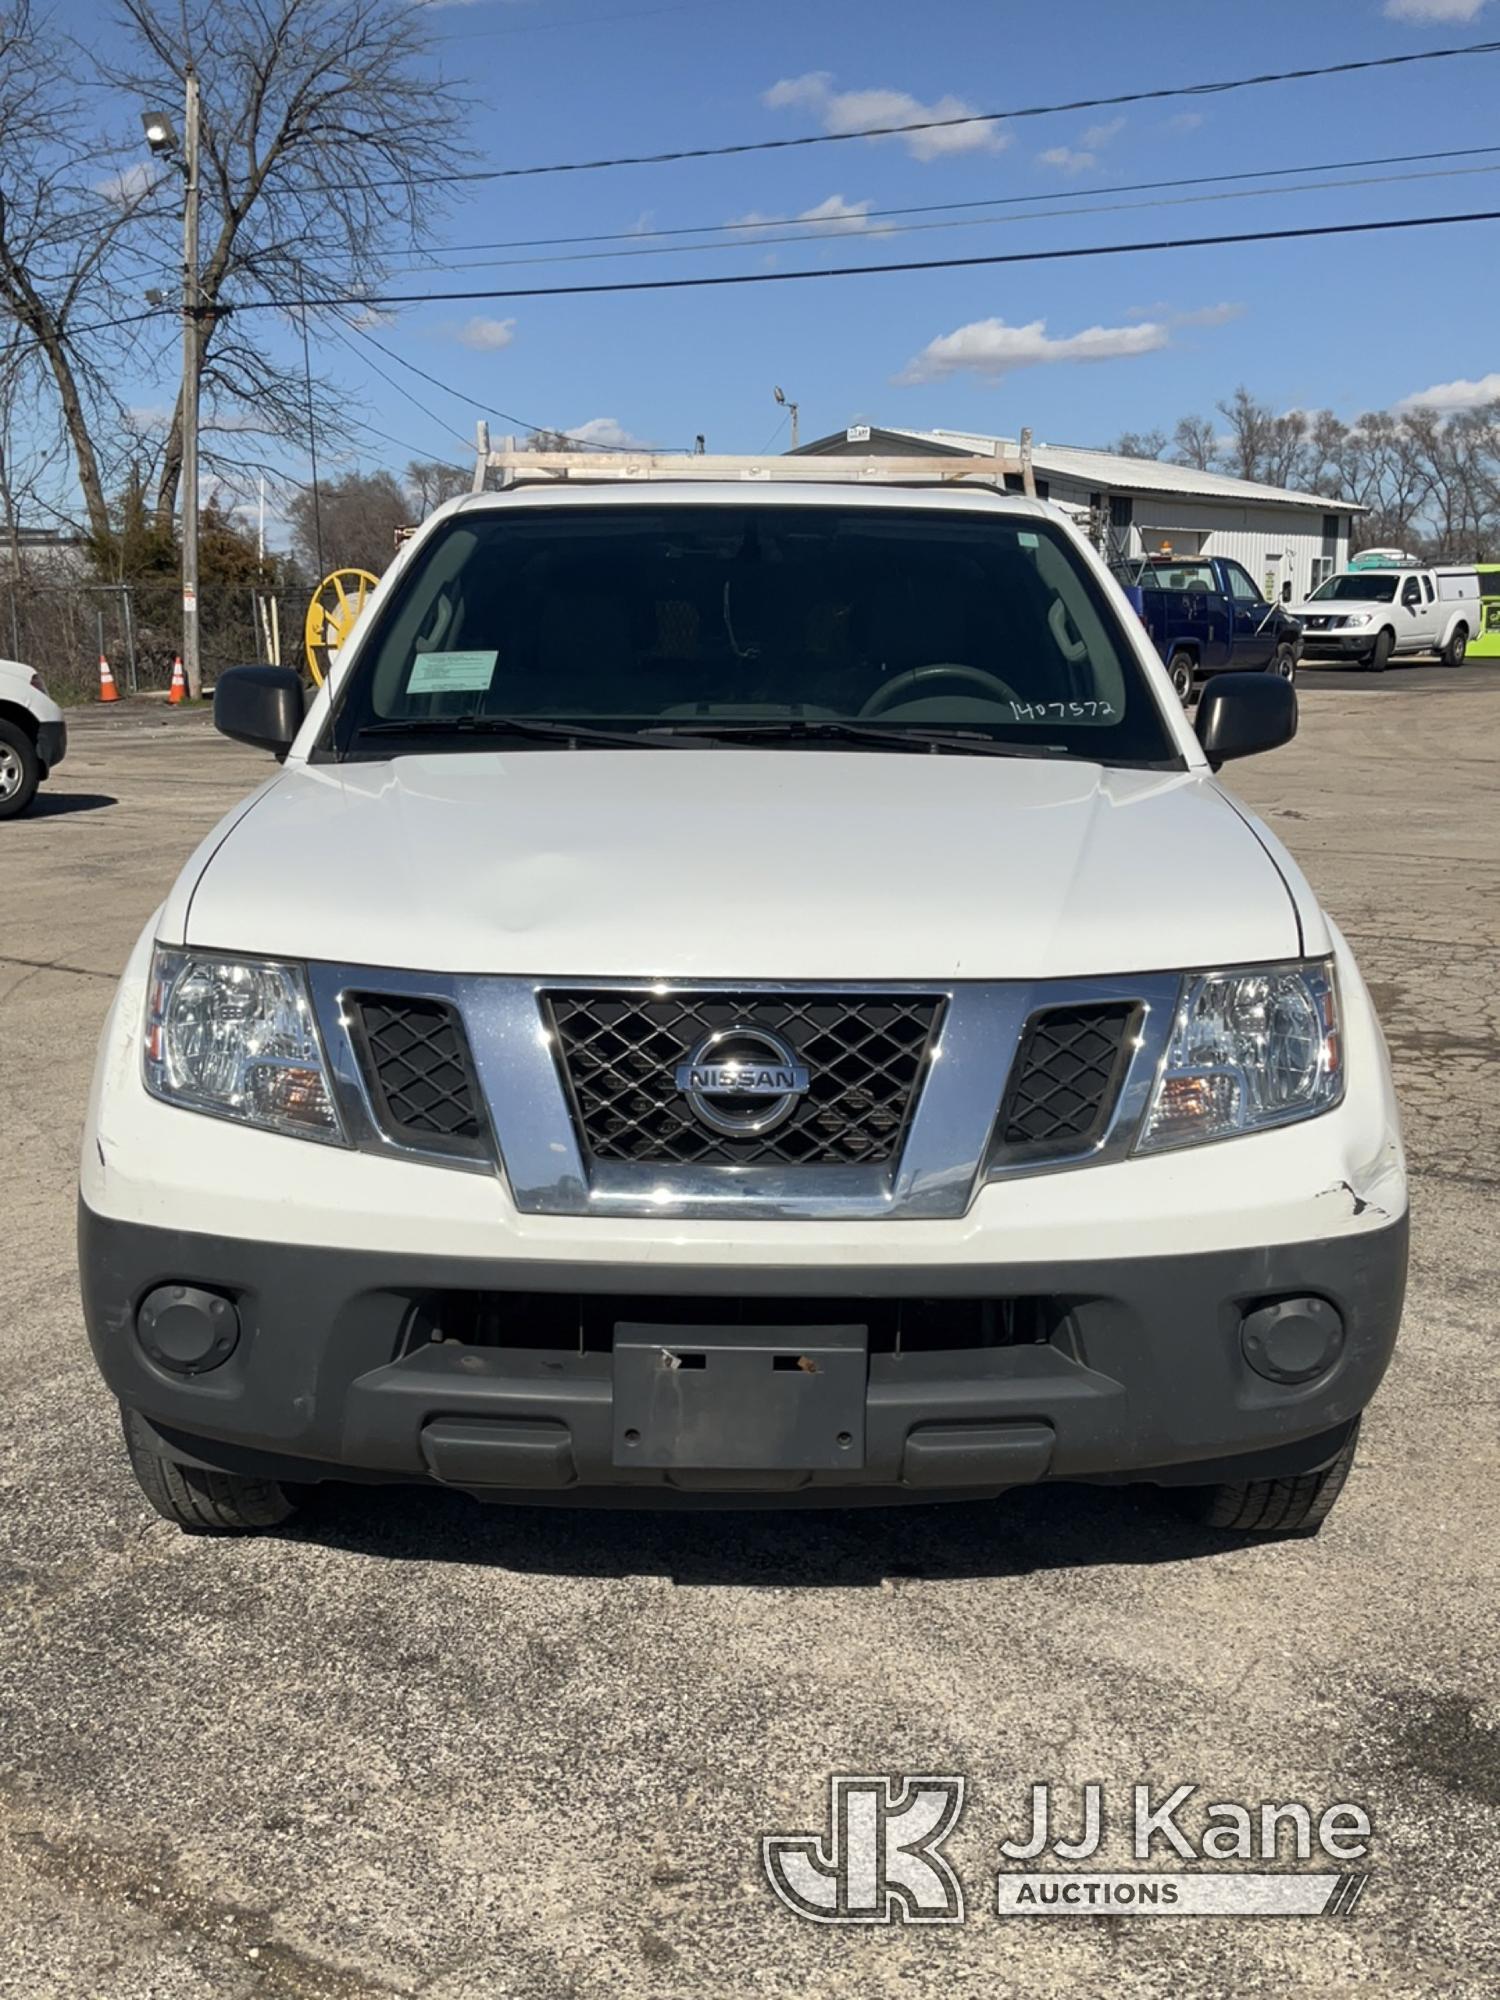 (South Beloit, IL) 2015 Nissan Frontier Extended-Cab Pickup Truck Runs & Moves) (Body Damage, Paint